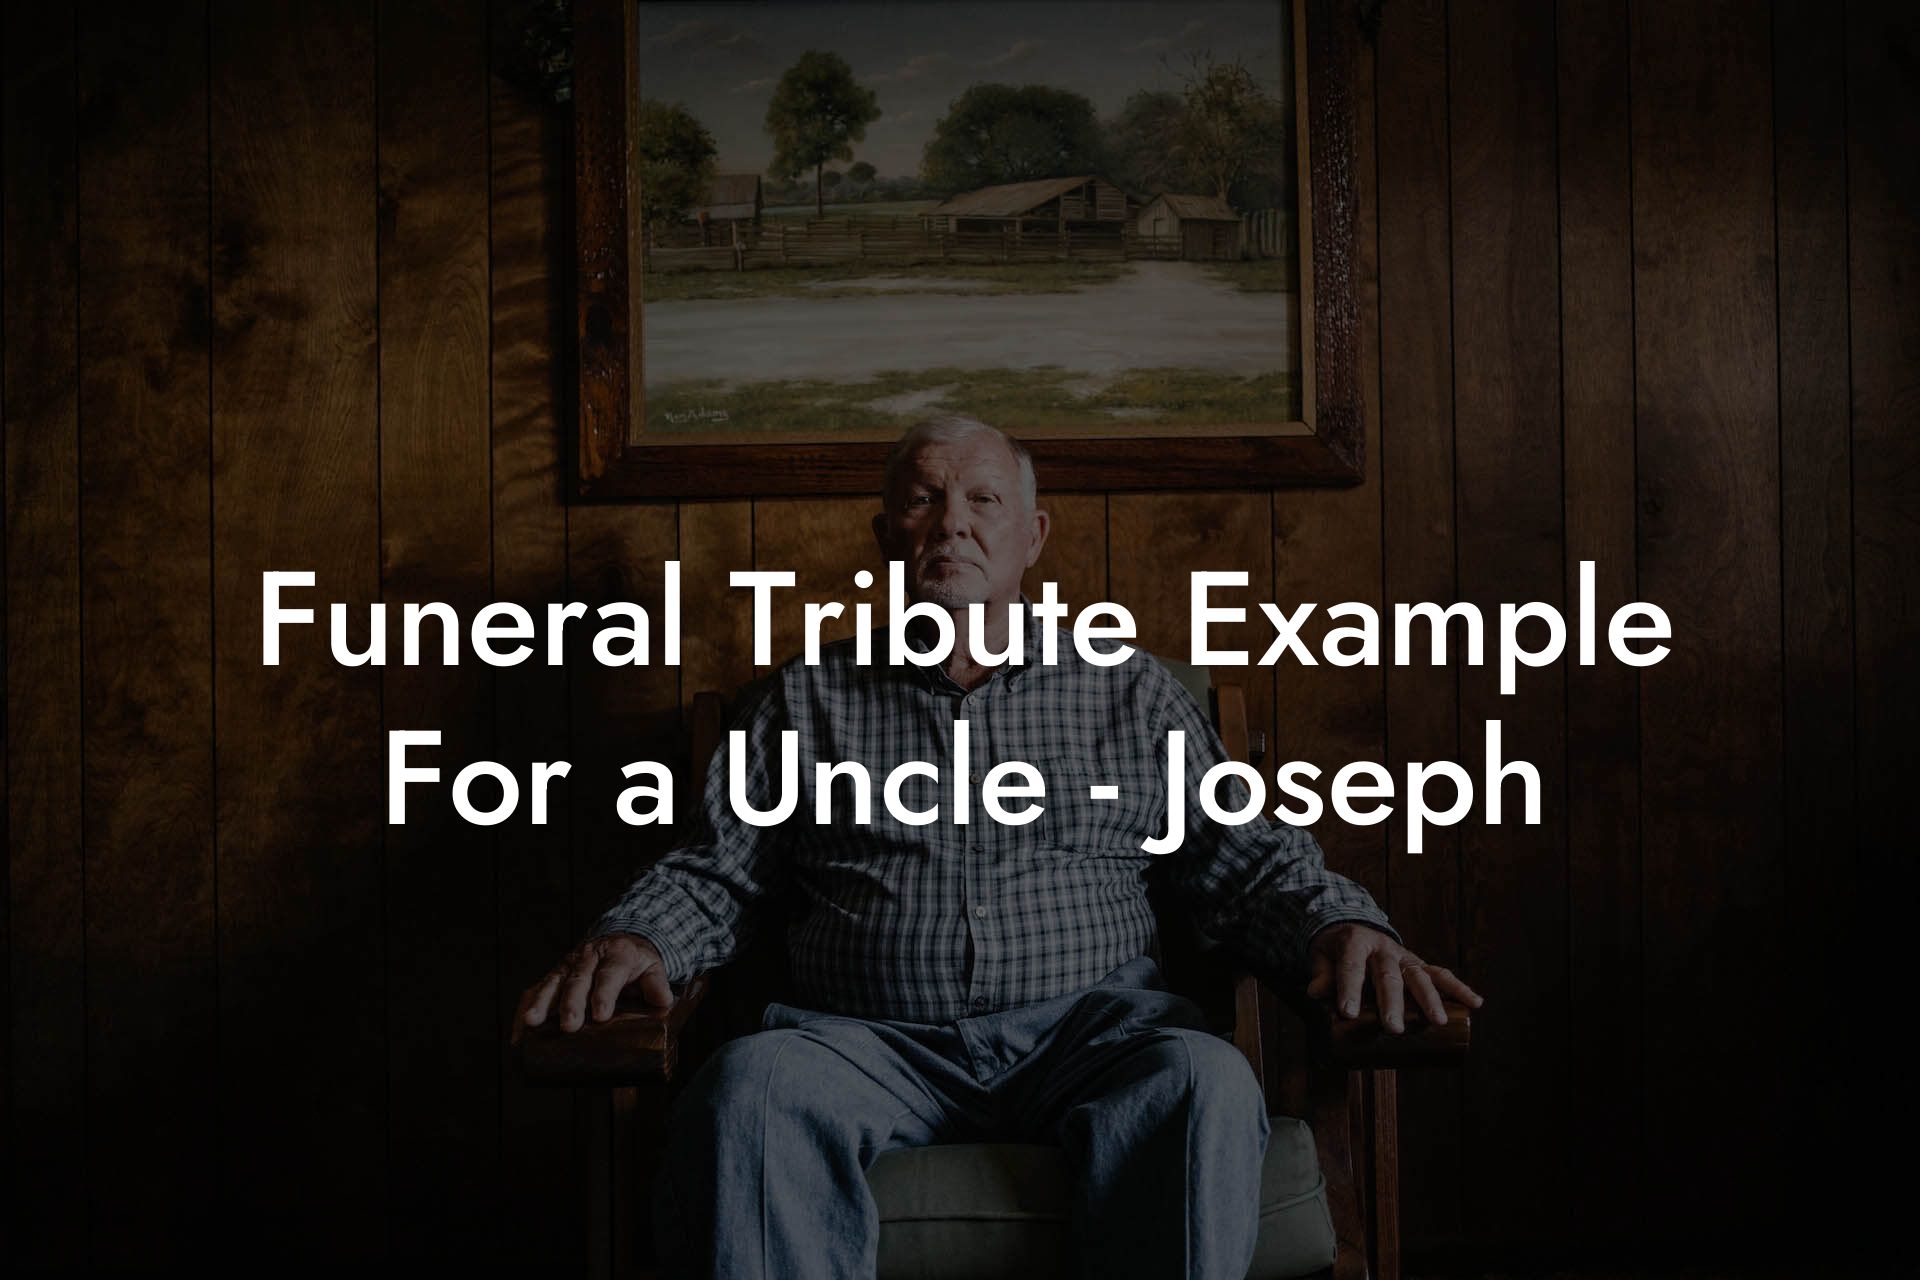 Funeral Tribute Example For a Uncle - Joseph